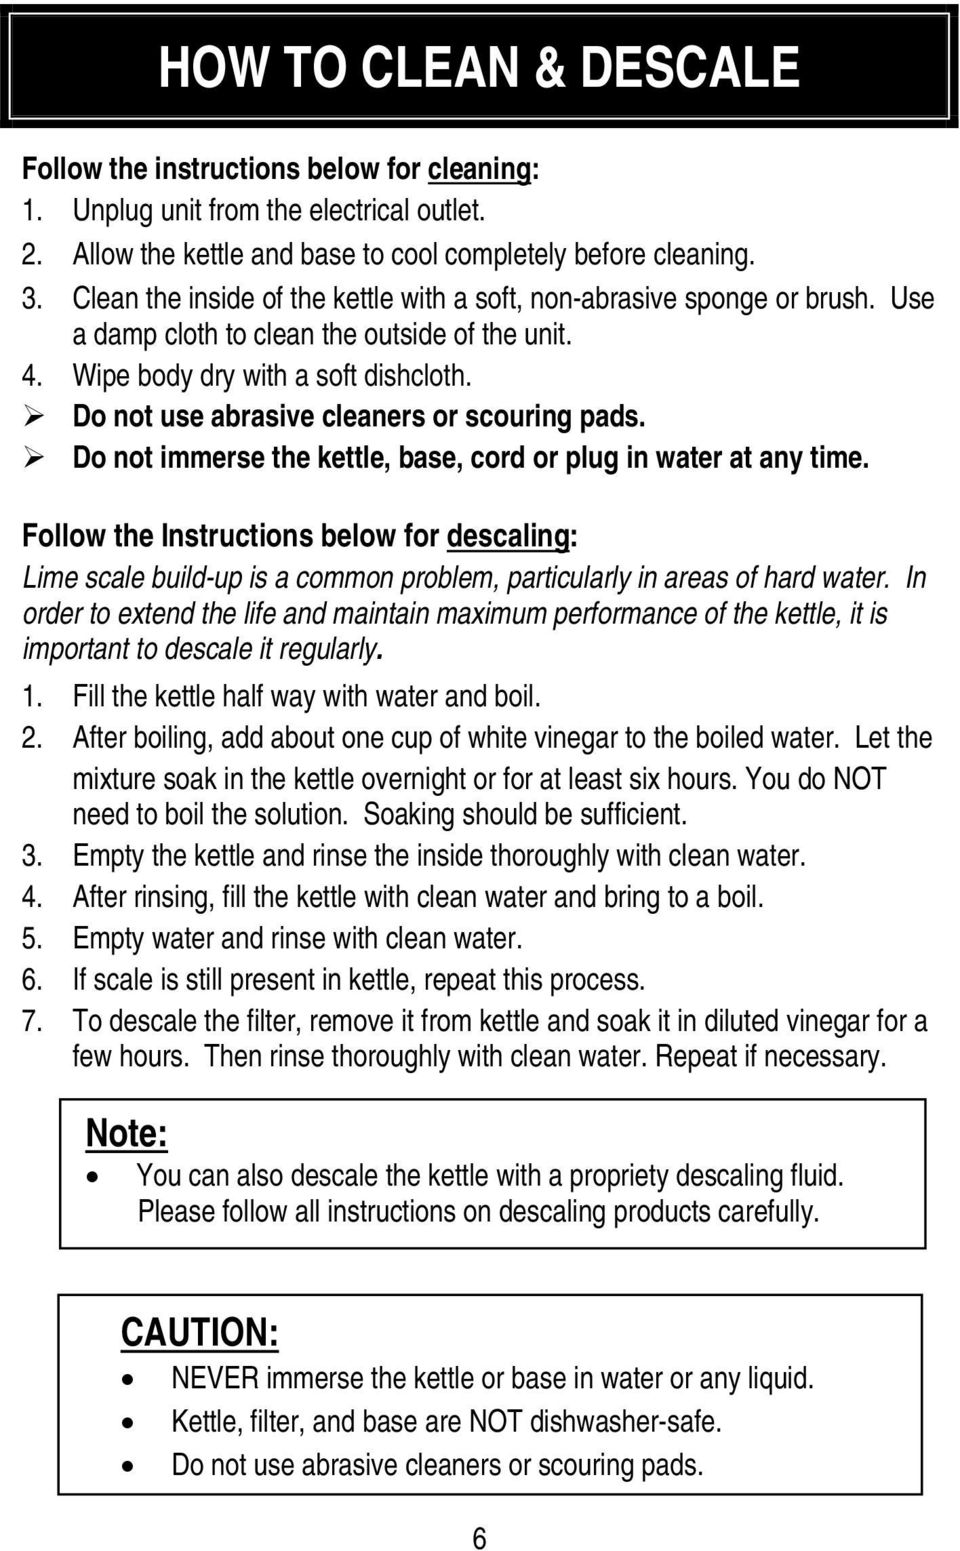 Do not use abrasive cleaners or scouring pads. Do not immerse the kettle, base, cord or plug in water at any time.